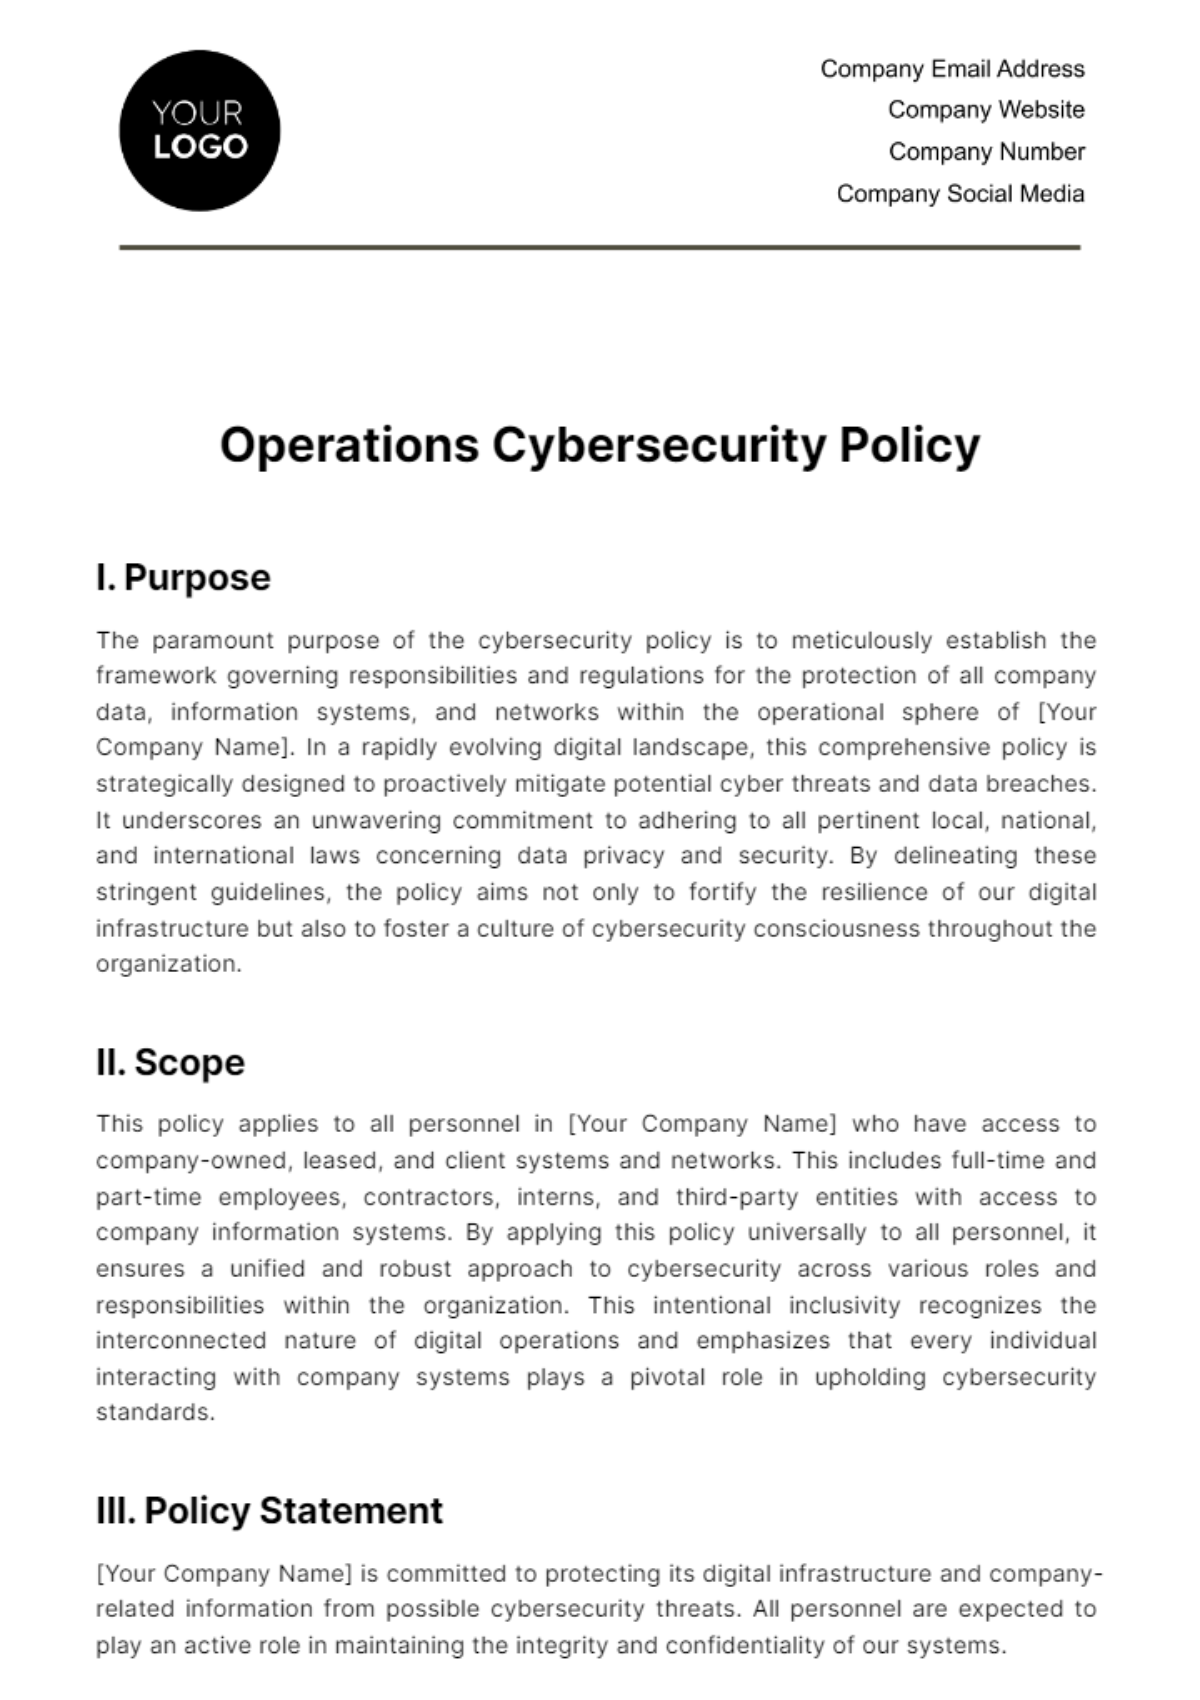  Operations Cybersecurity Policy Template